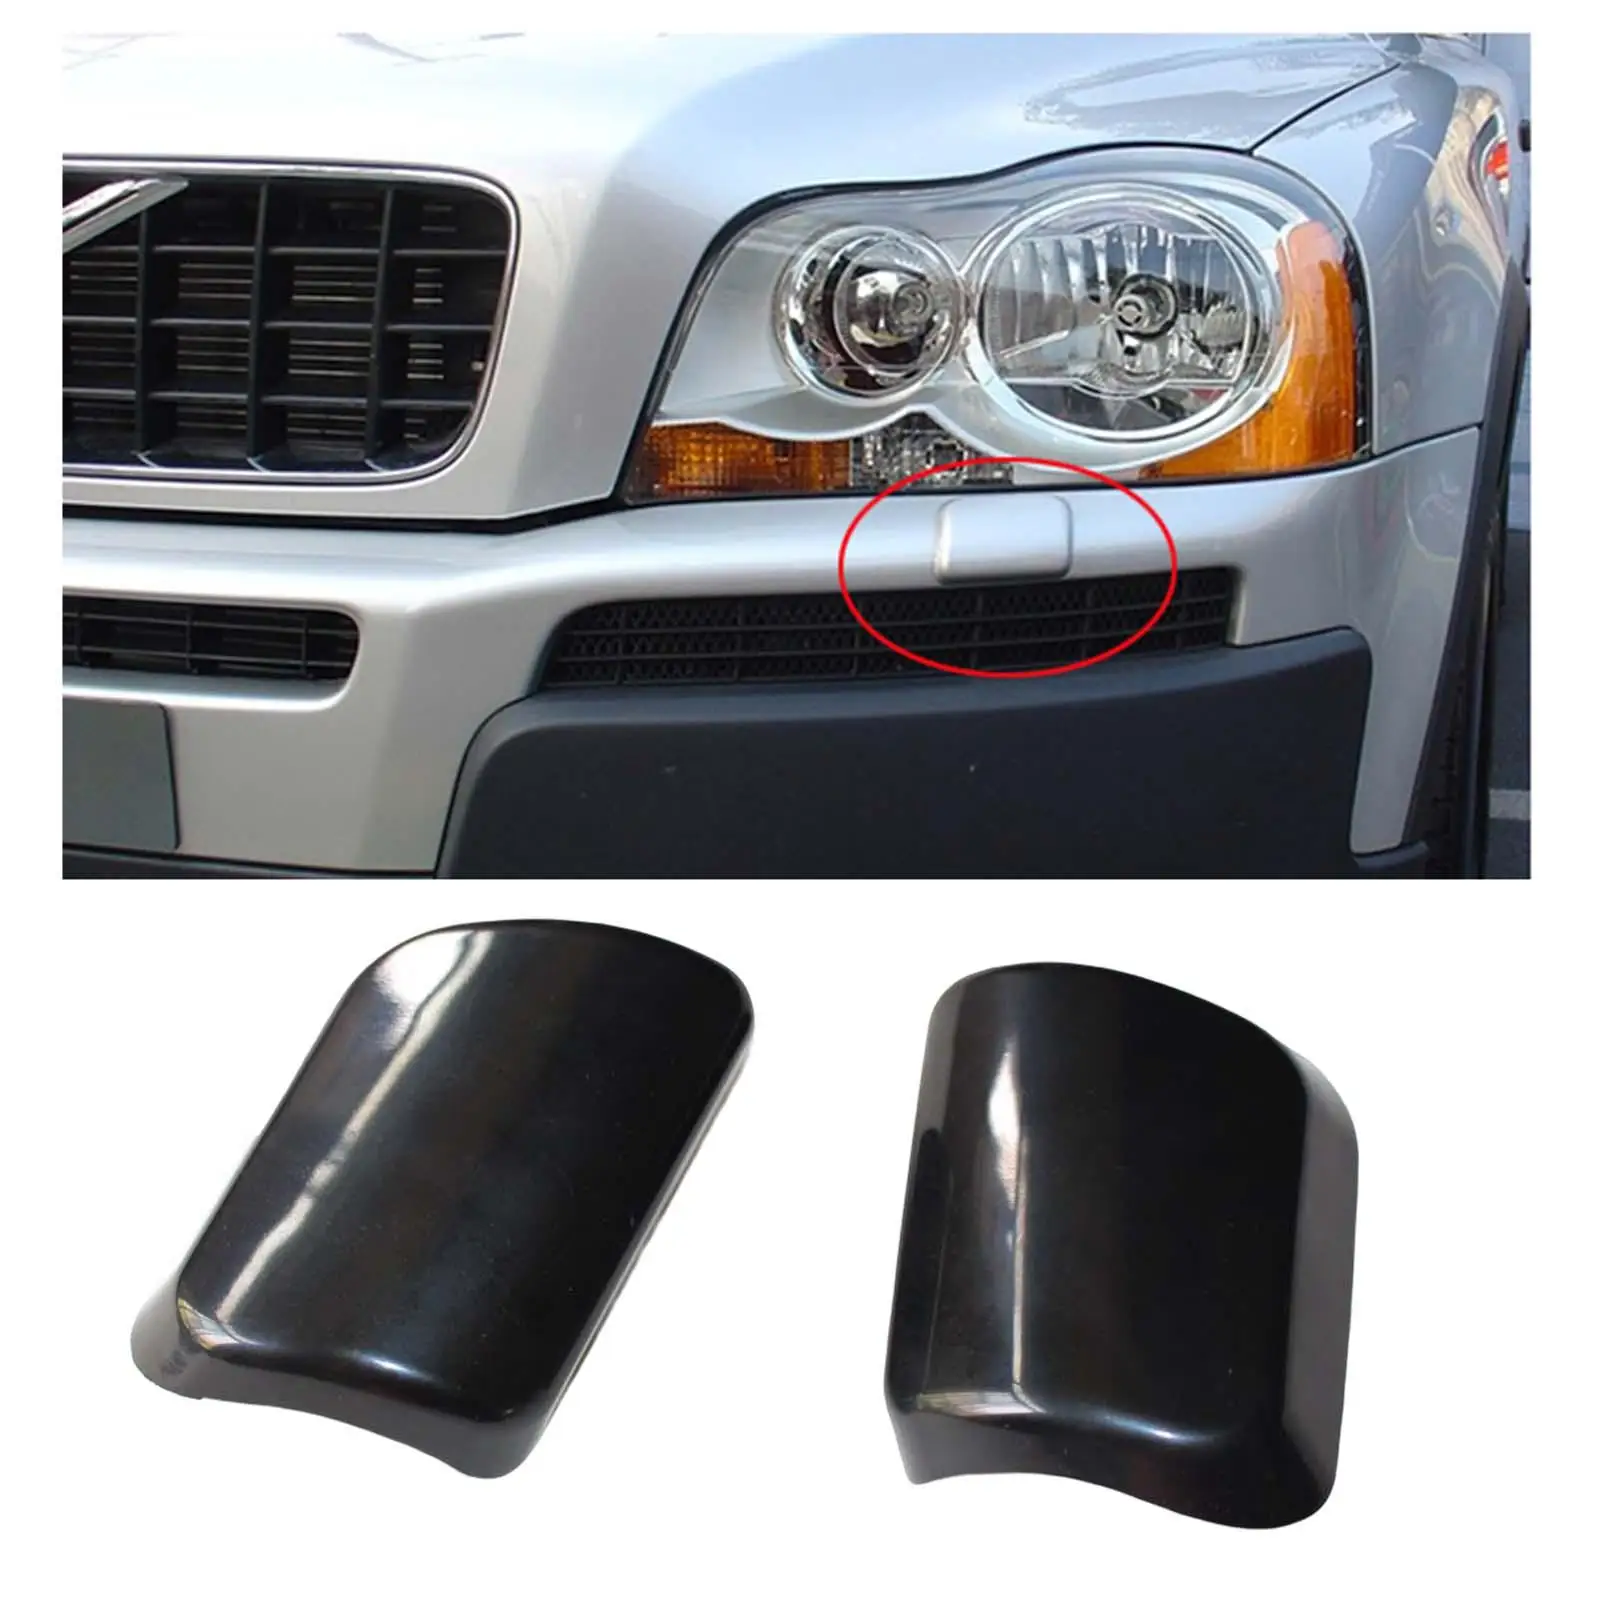 2x Headlight Washer Nozzle Covers Fit for Volvo 90 2003-2006 30698209